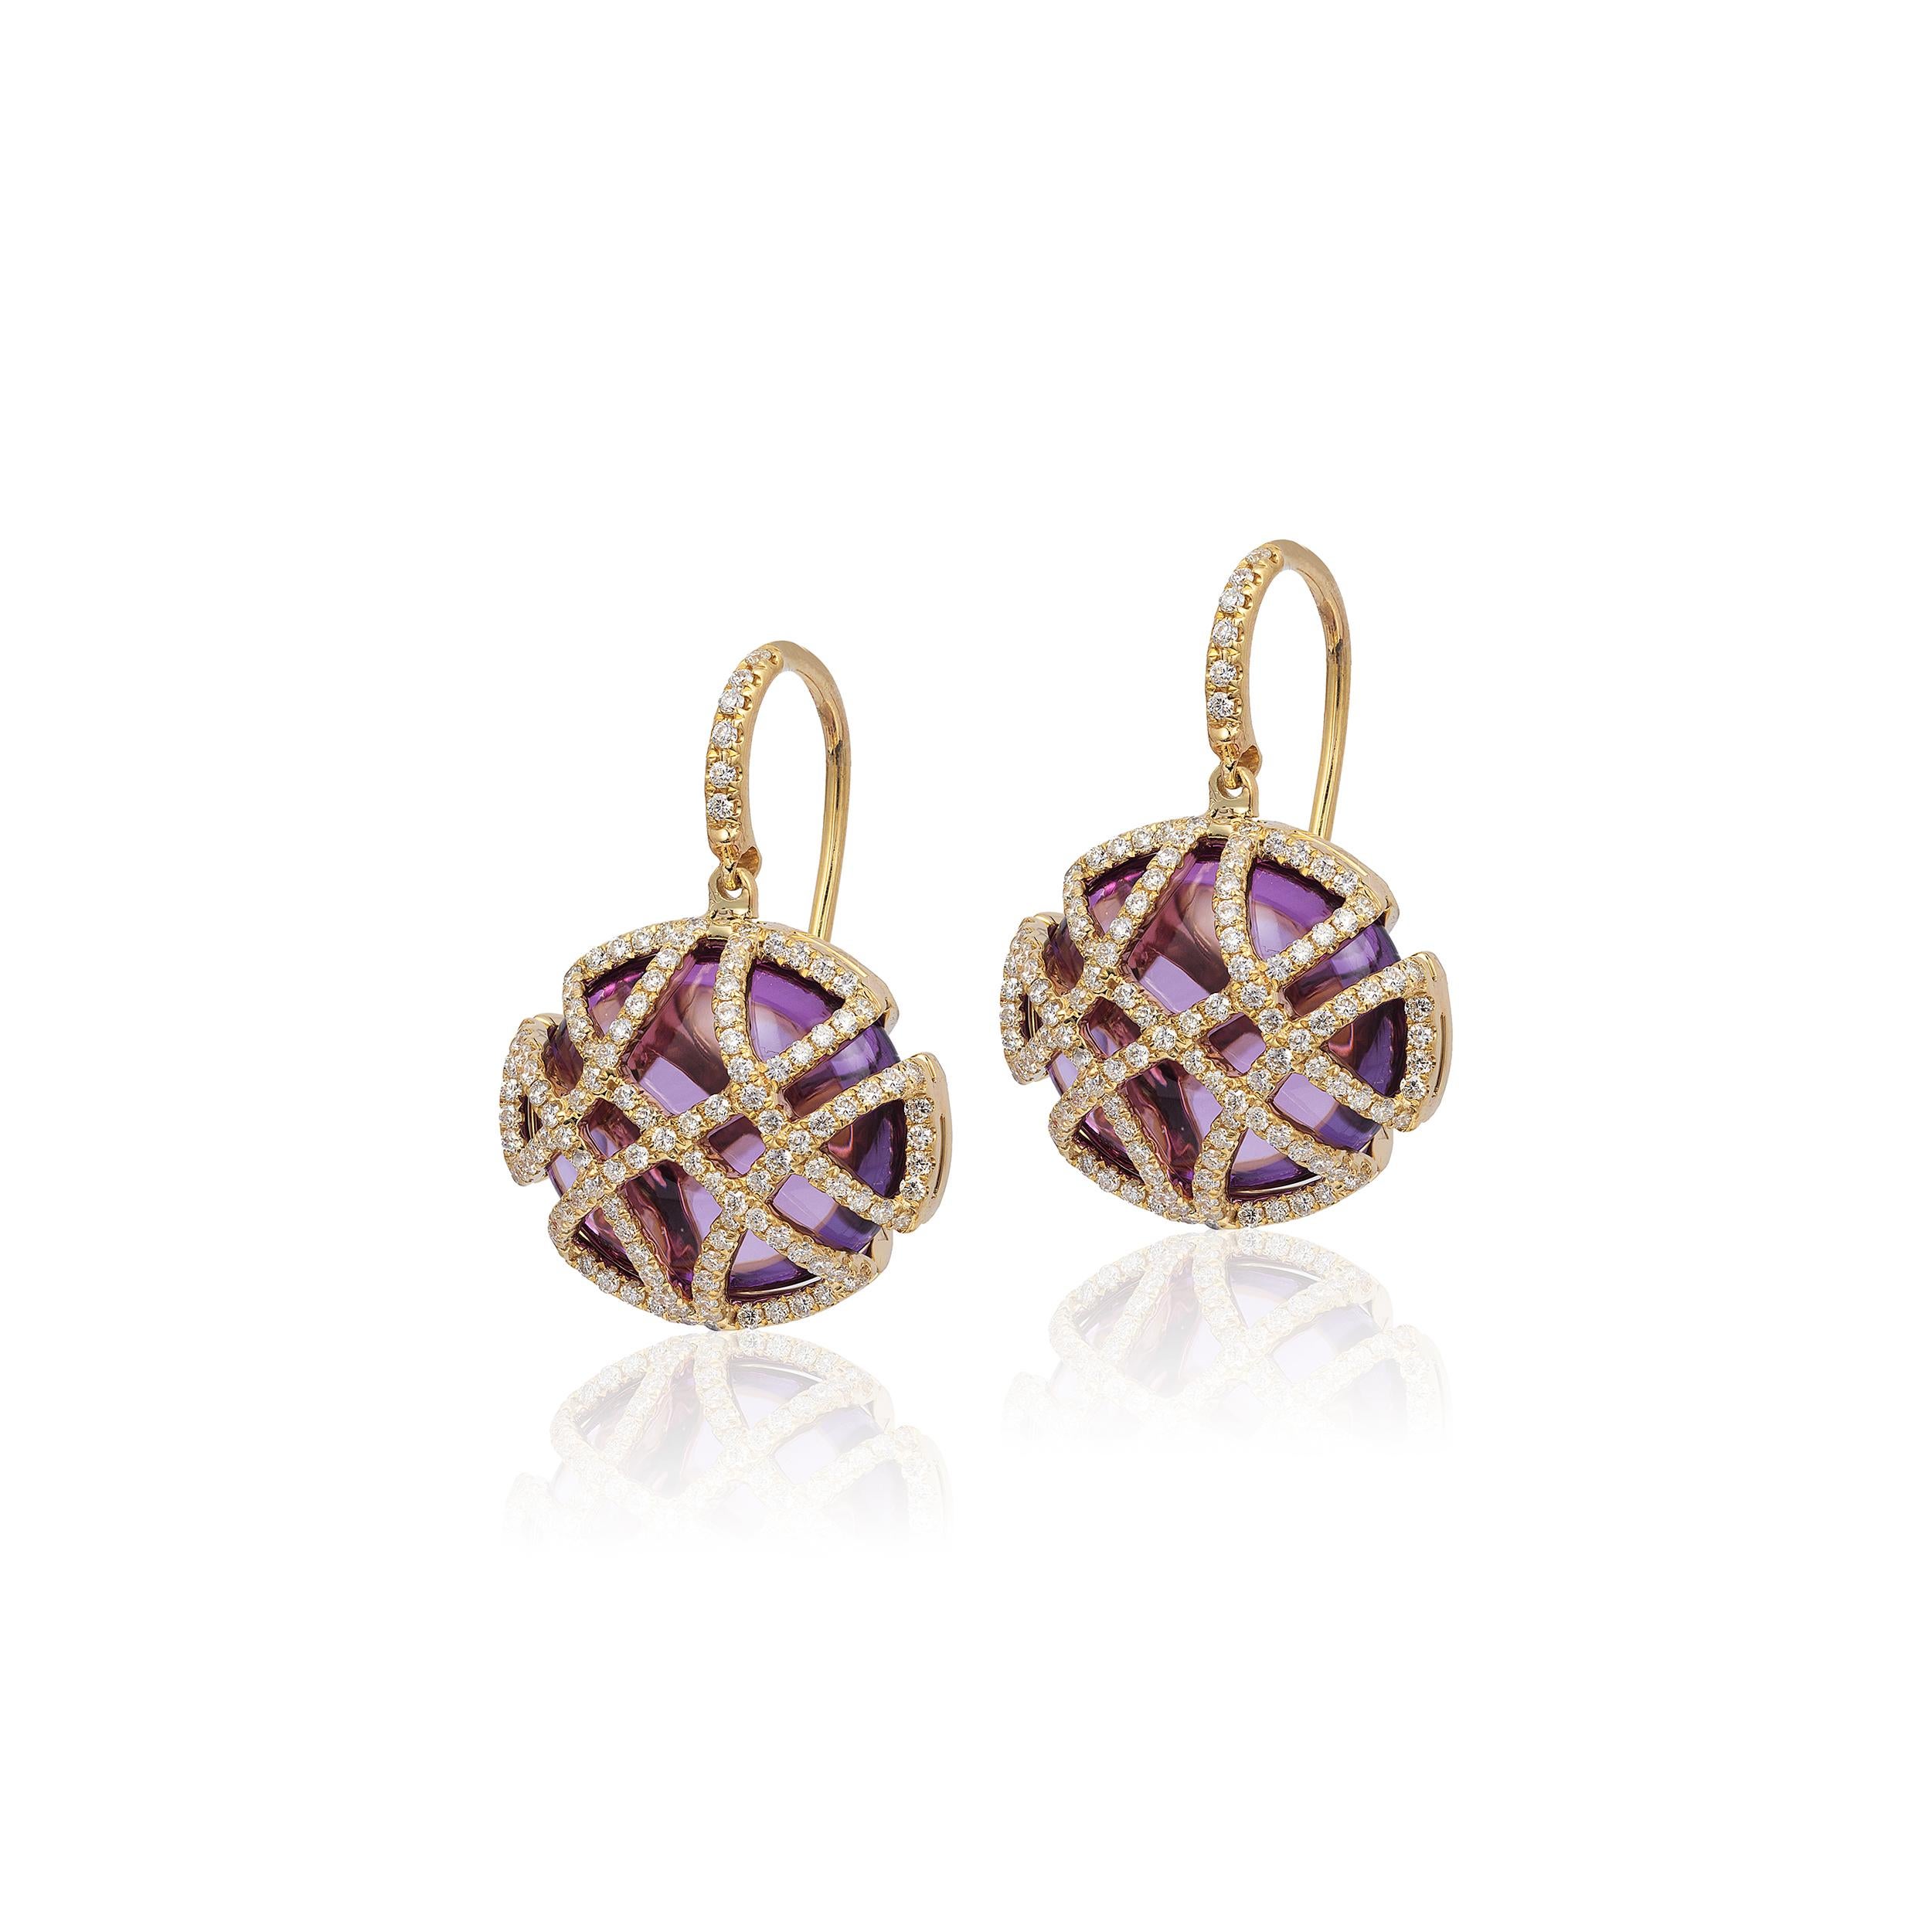 Amethyst Oblong Cage Earring with Diamonds on Wire in 18K White Gold, from 'Freedom' Collection
 
 Stone Size: 16 x 13.5 mm
 
 Gemstone Approx Wt: Amethyst- 24.43 Carats 
 
 Diamonds: G-H / VS, Approx Wt: 1.12 Carats